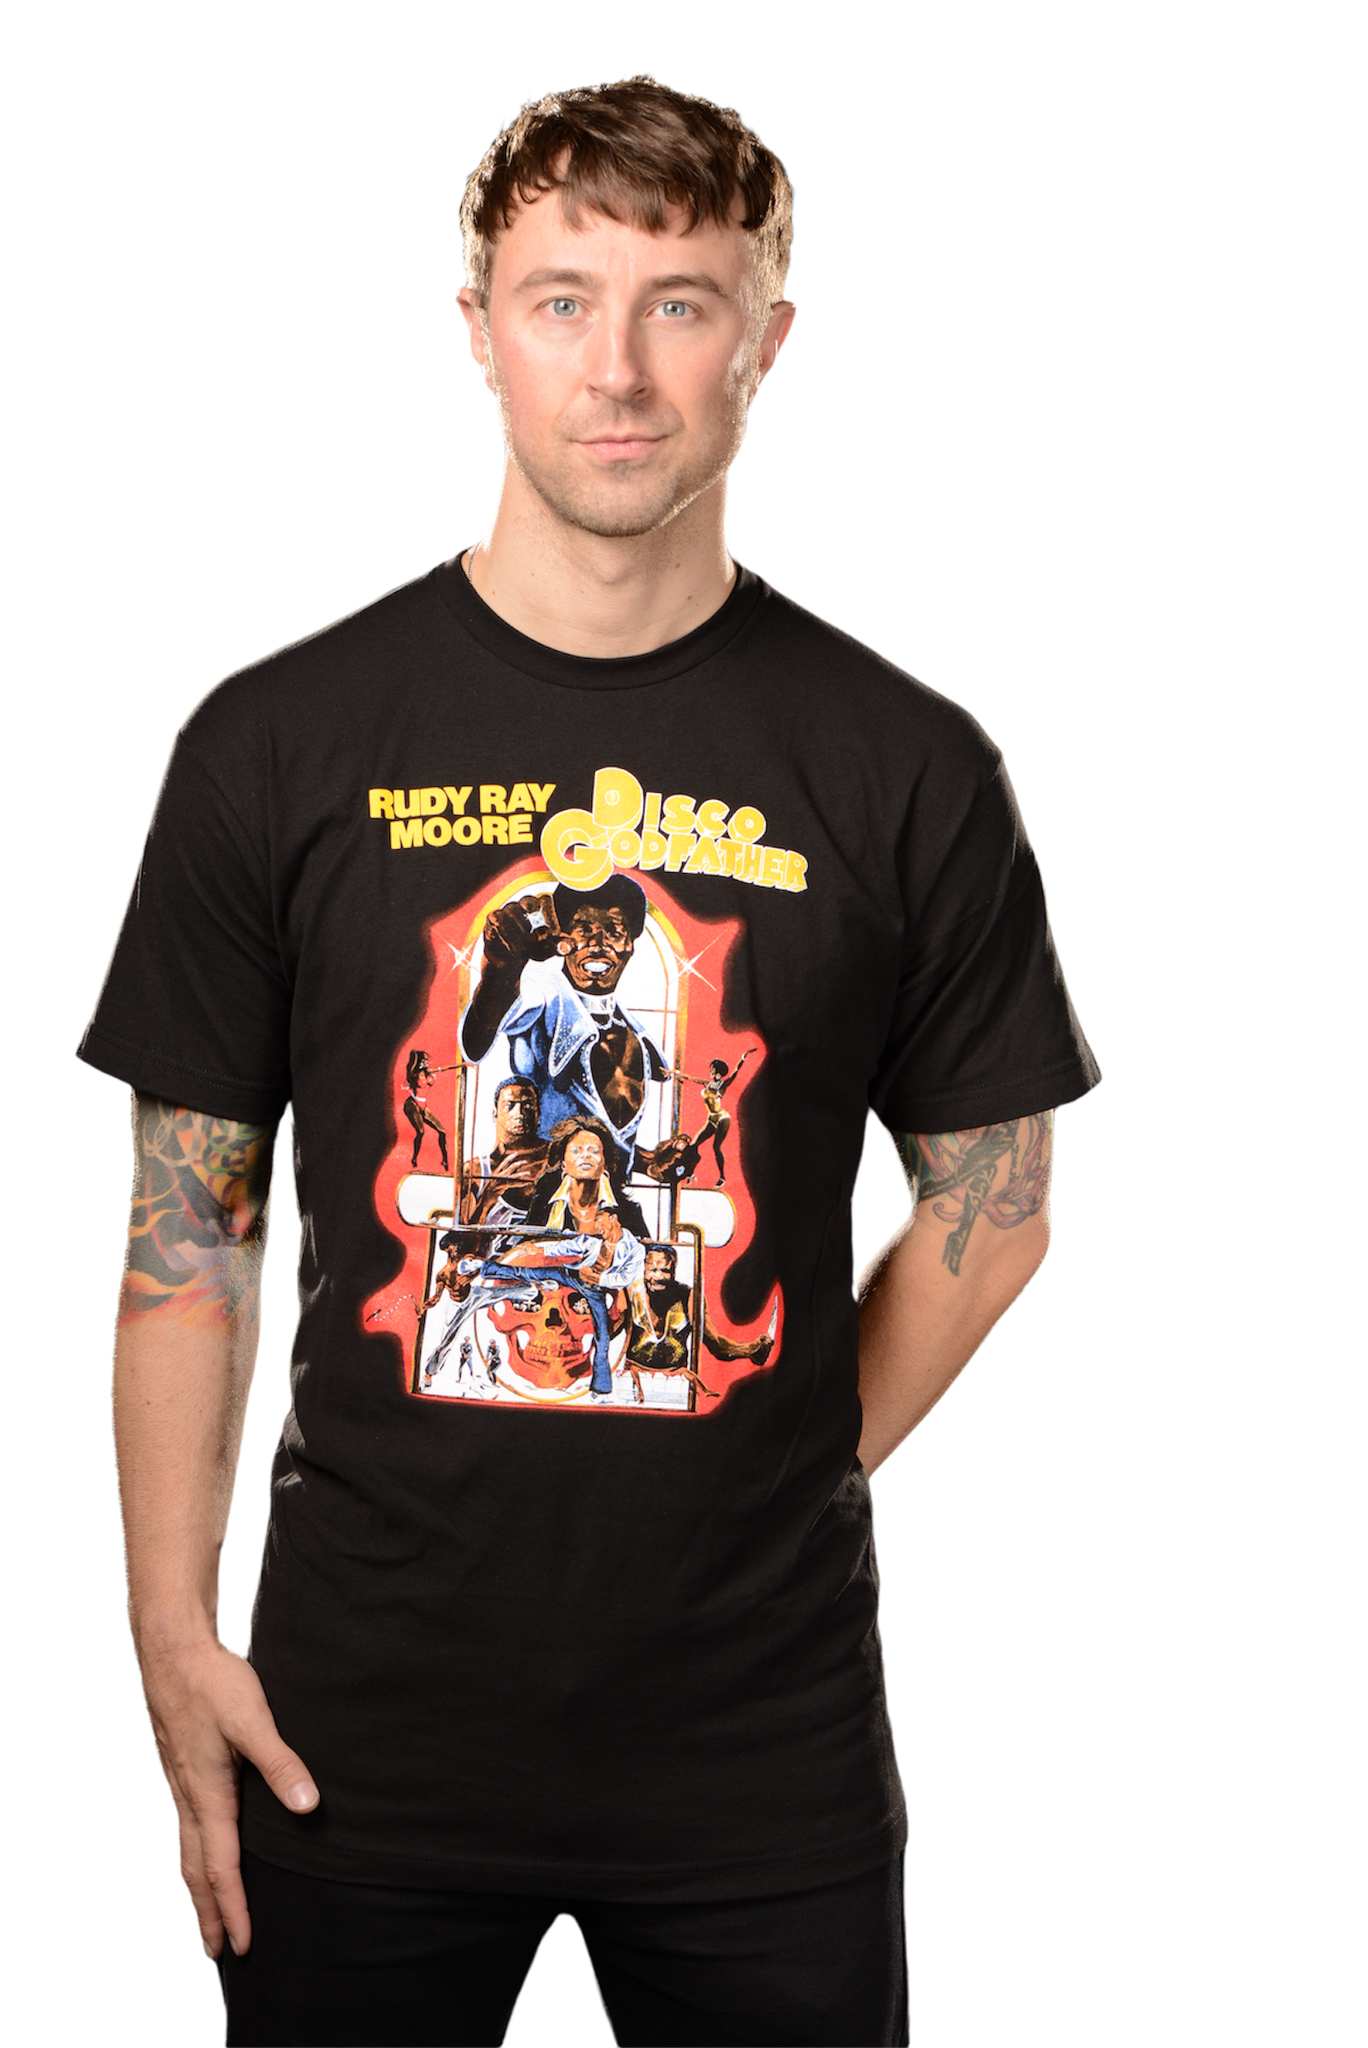 RUDY RAY MOORE IS THE DISCO GODFATHER T-SHIRT